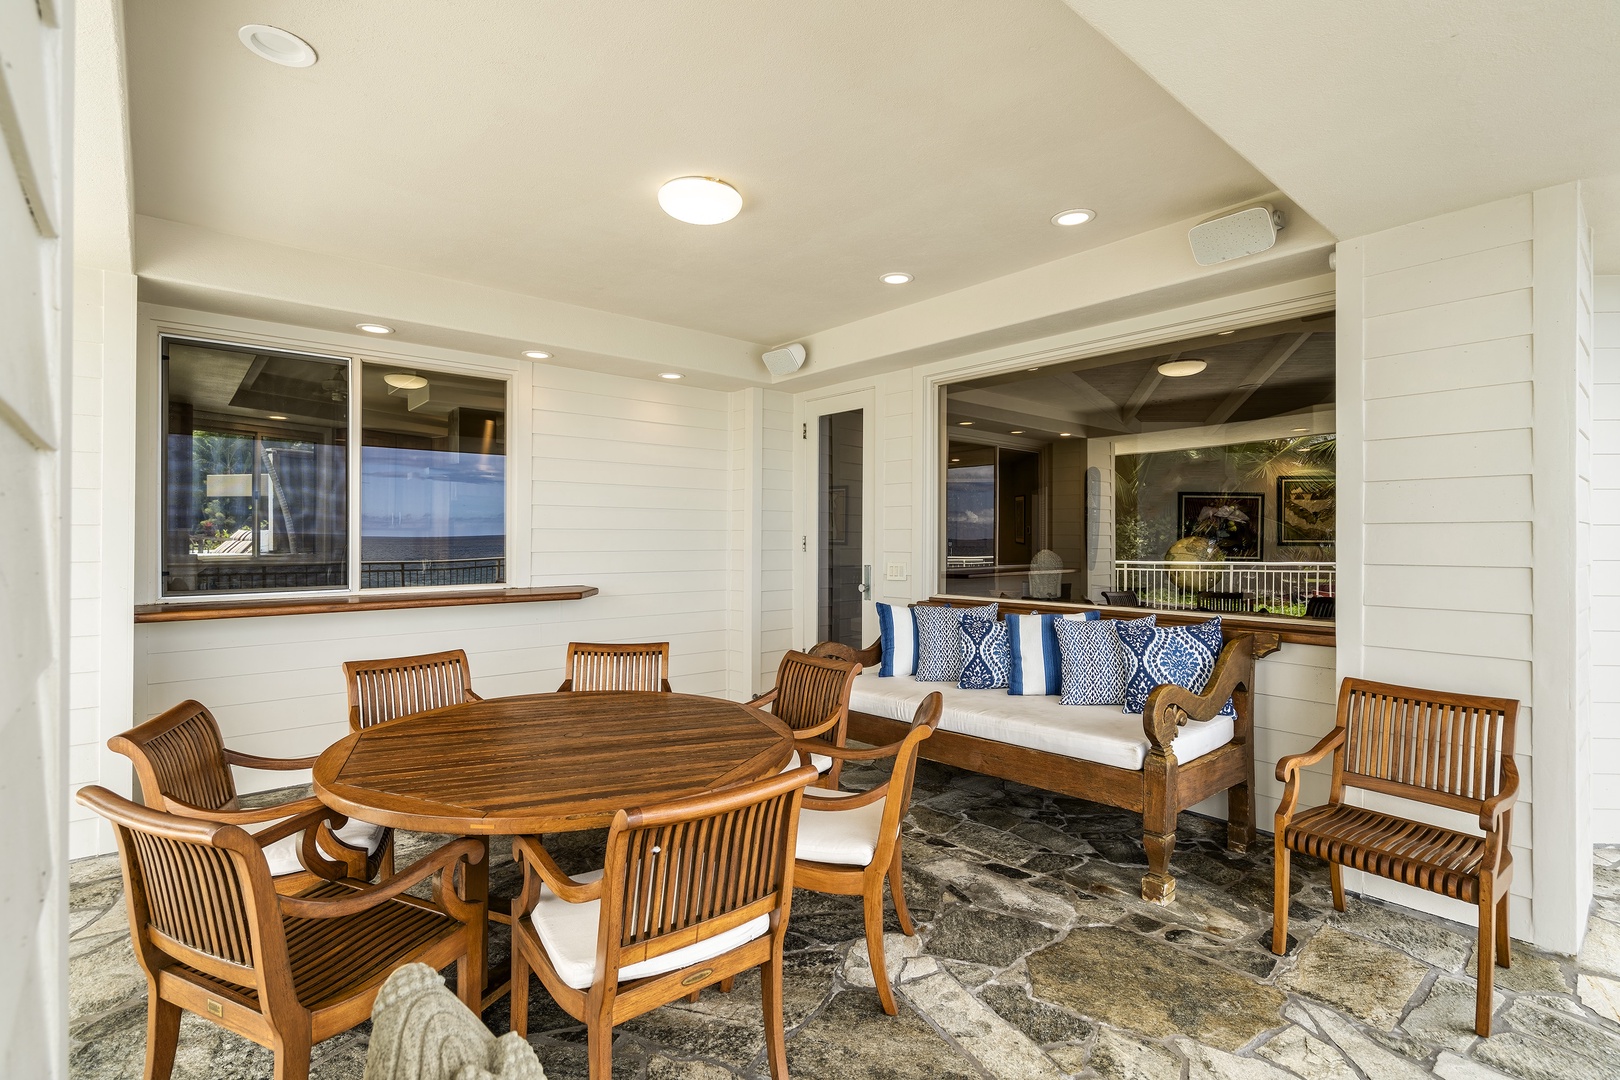 Kailua Kona Vacation Rentals, Ali'i Point #12 - Outdoor dining and lounge style seating!